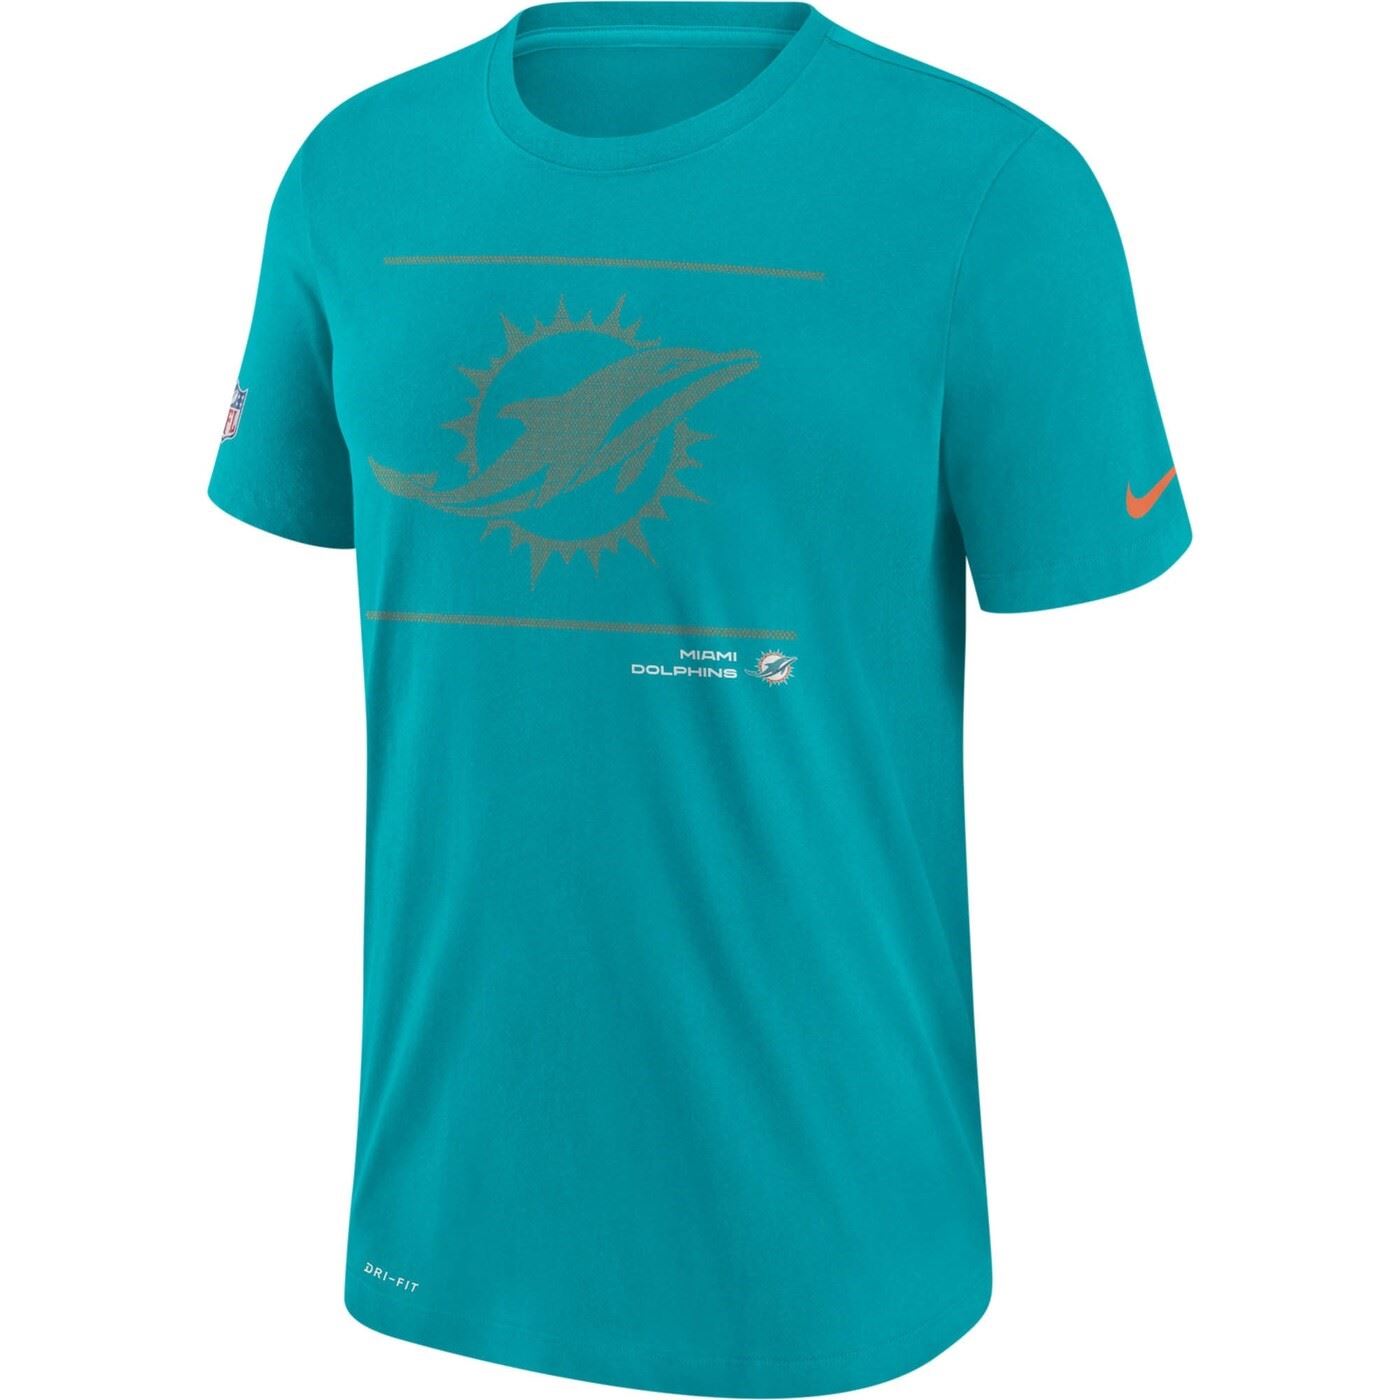 Miami Dolphins NFL DFCT Team Issue Tee Turbo Green T-Shirt Nike